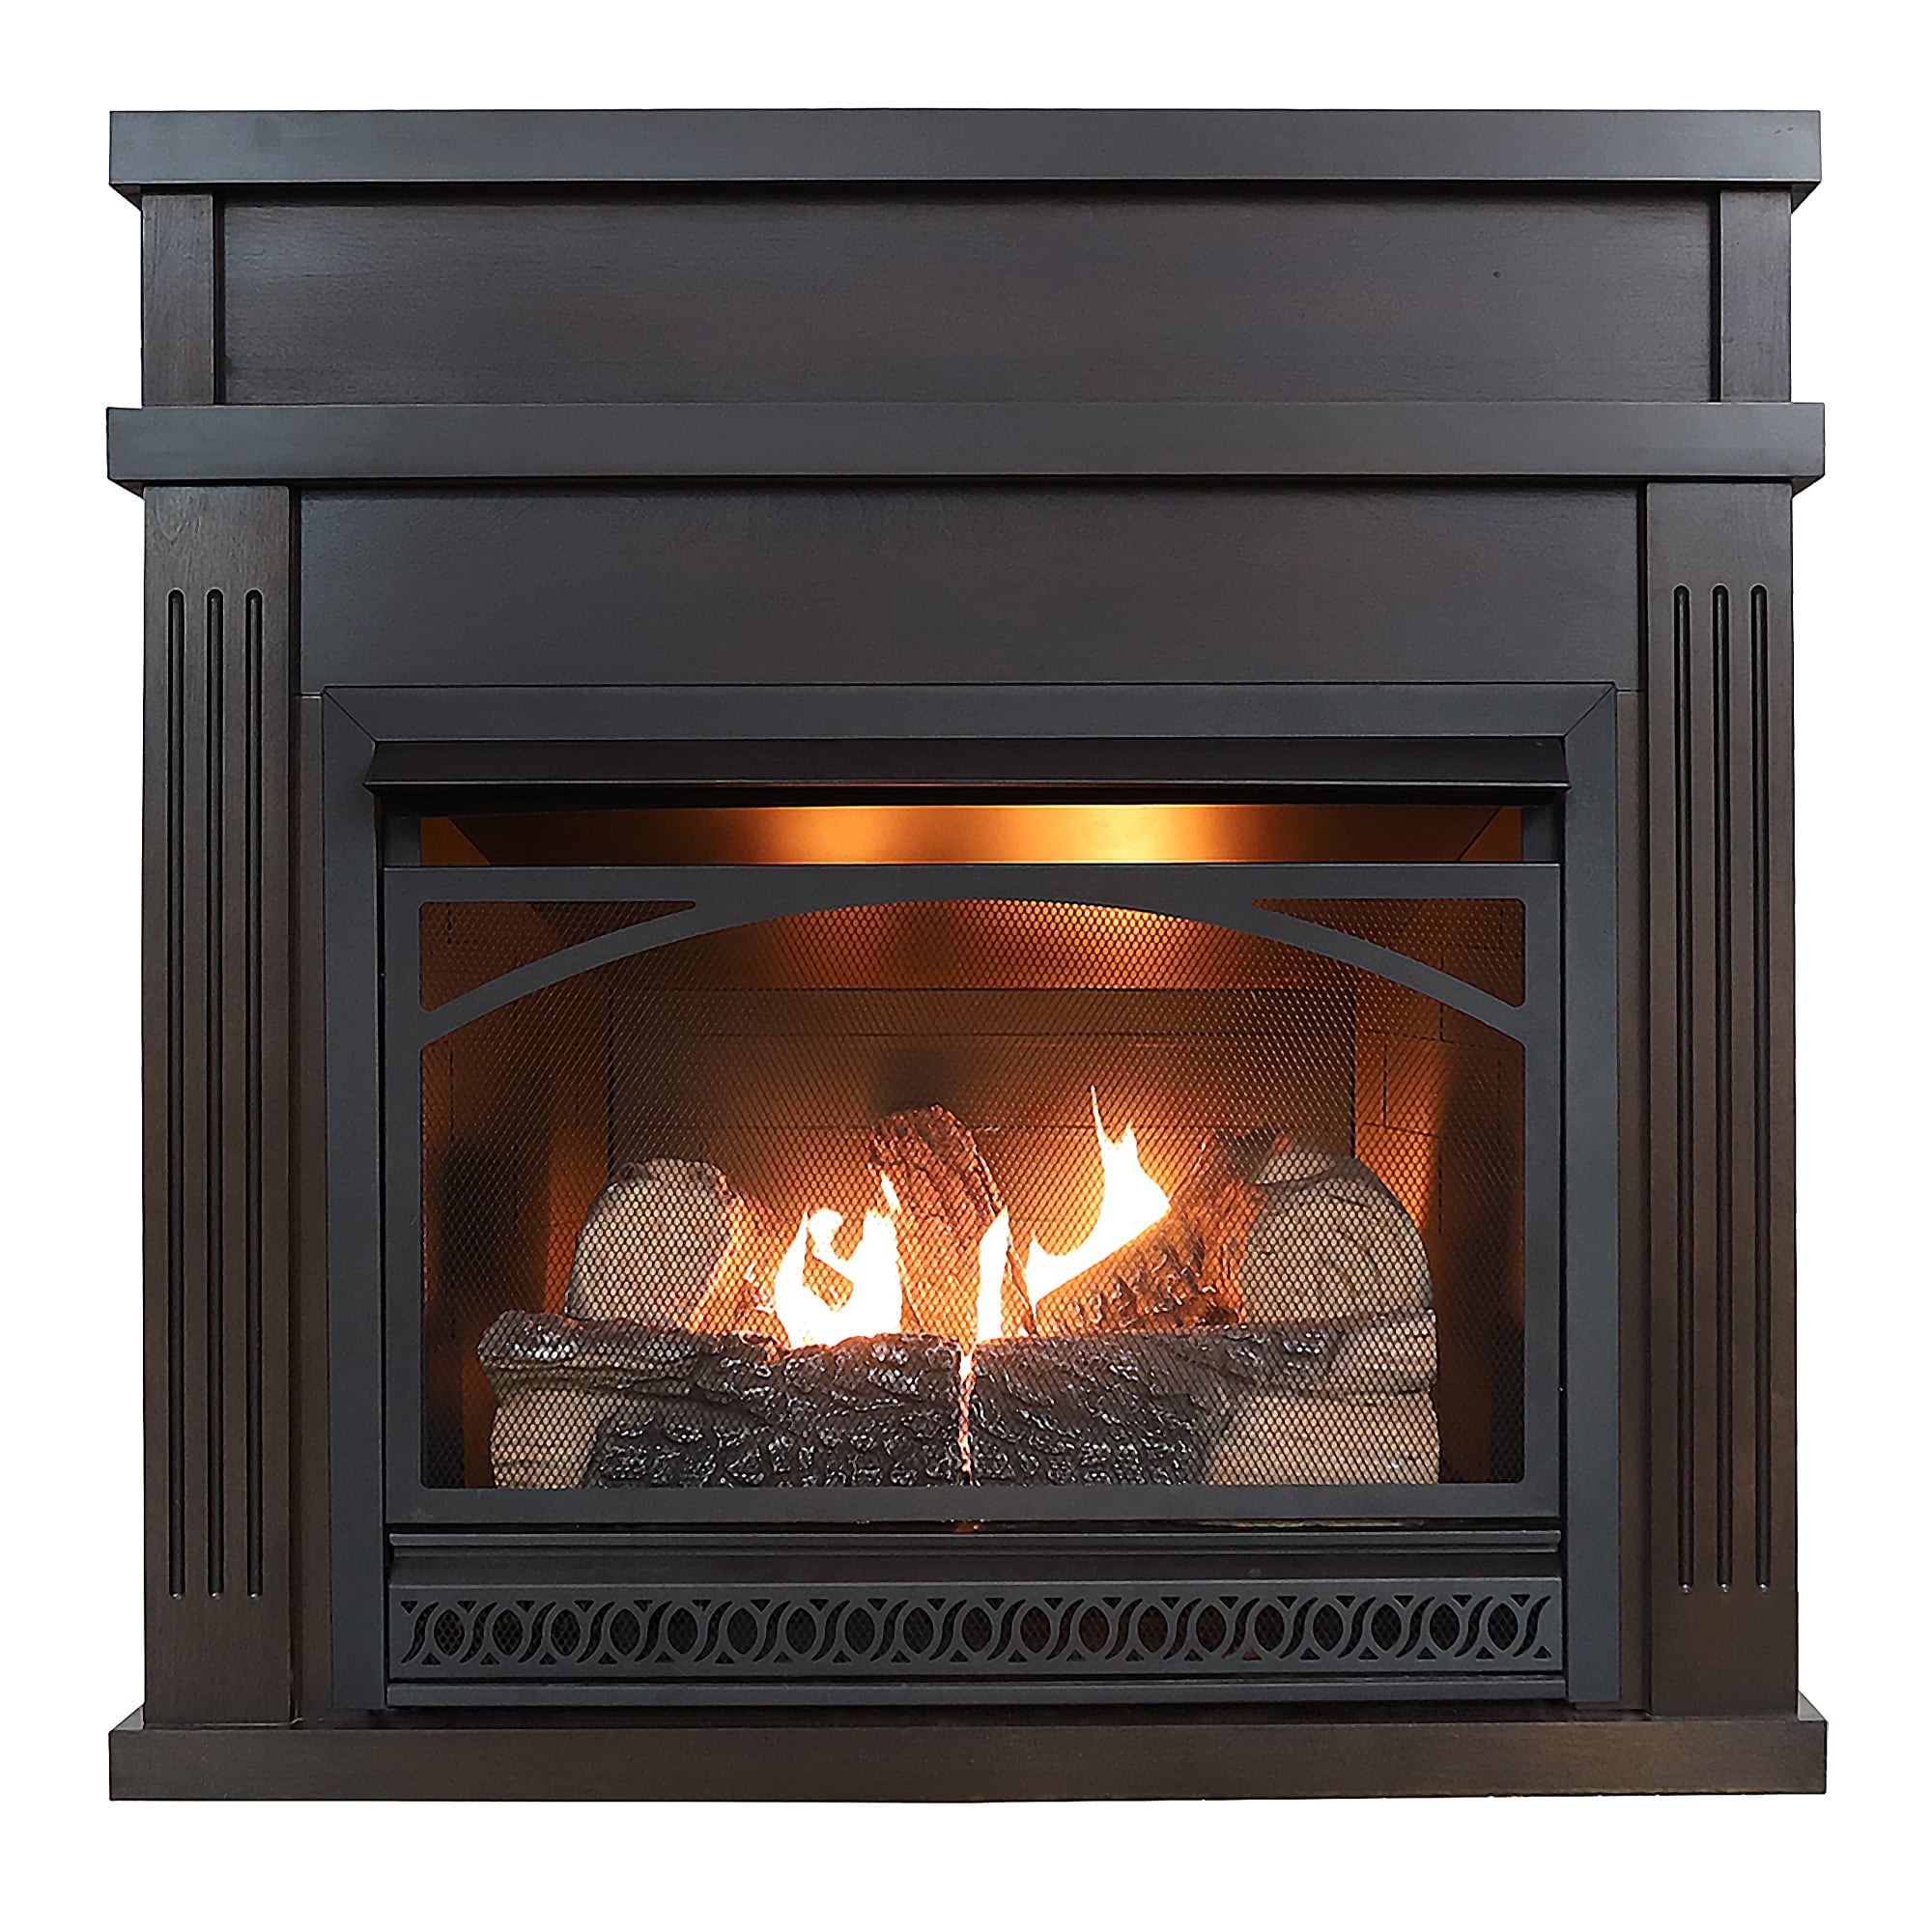  Comfort Flame Vent Free Gas Fireplace Dual Compact